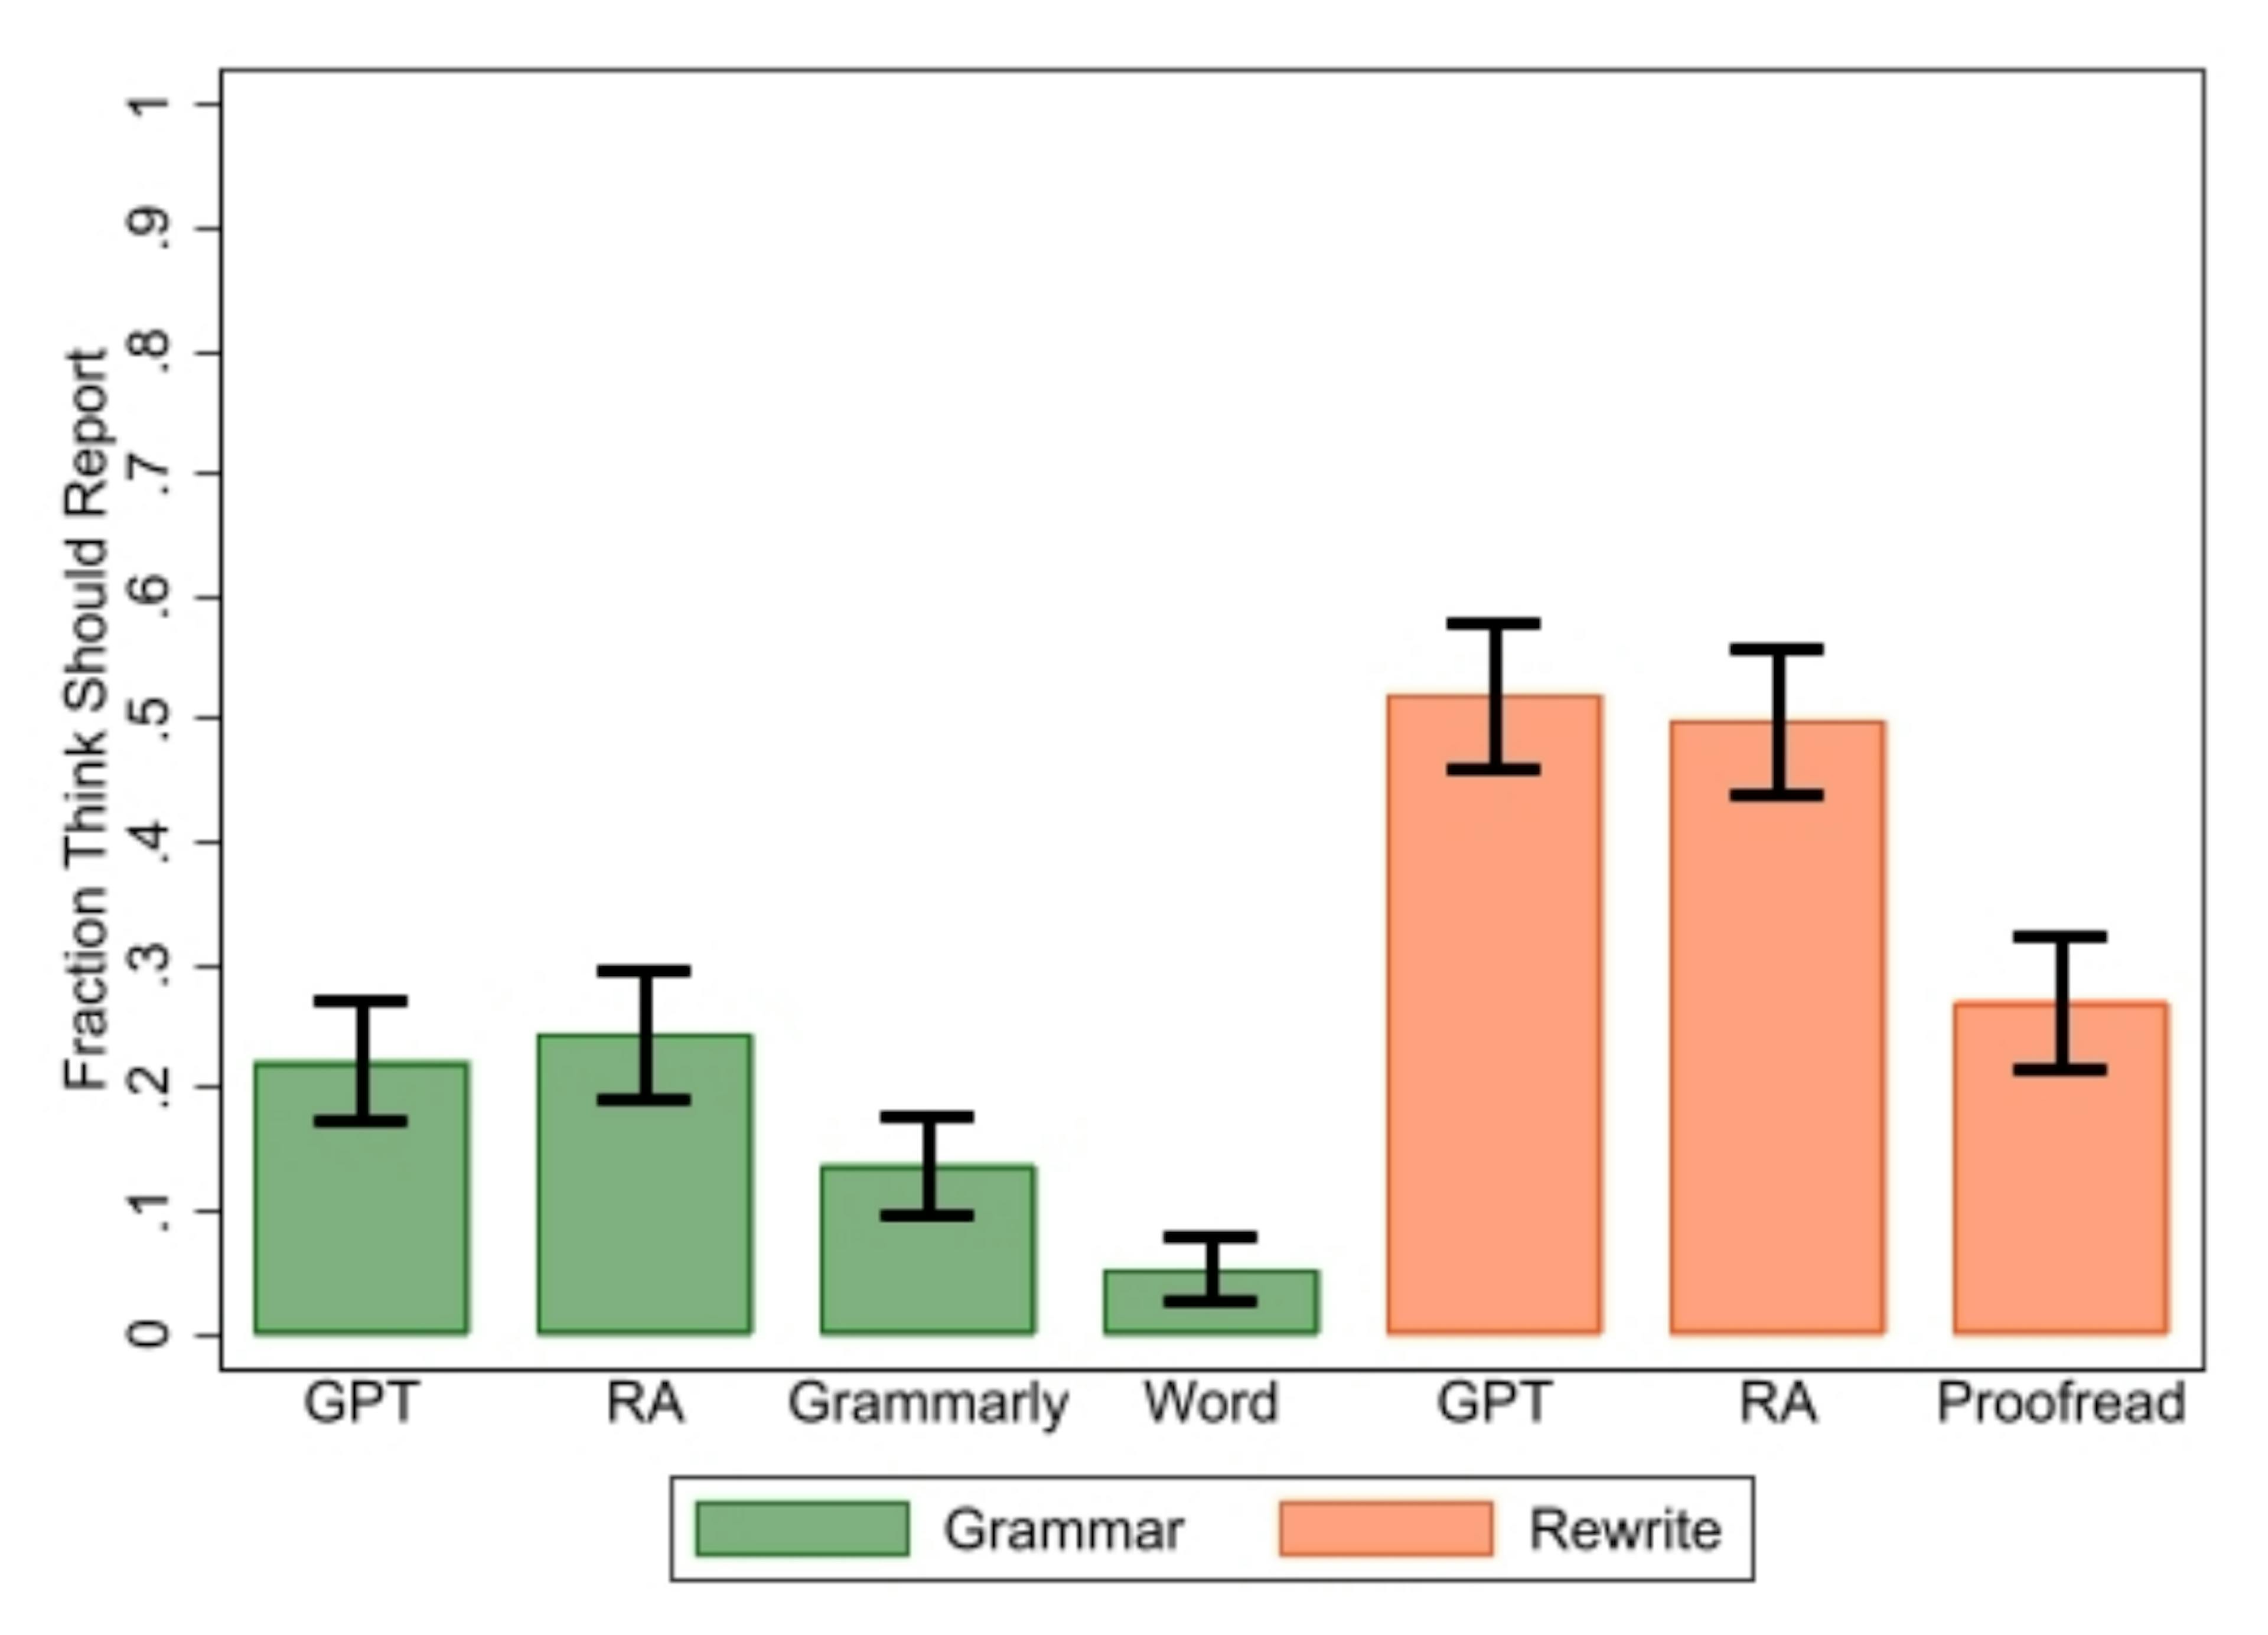 Figure 3: Fraction of survey respondents indicating that ChatGPT, RA, Grammarly, and Word use in fixing grammar or ChatGPT, RA, or Proofreading use in rewriting text should be reported, with 95% confidence intervals.